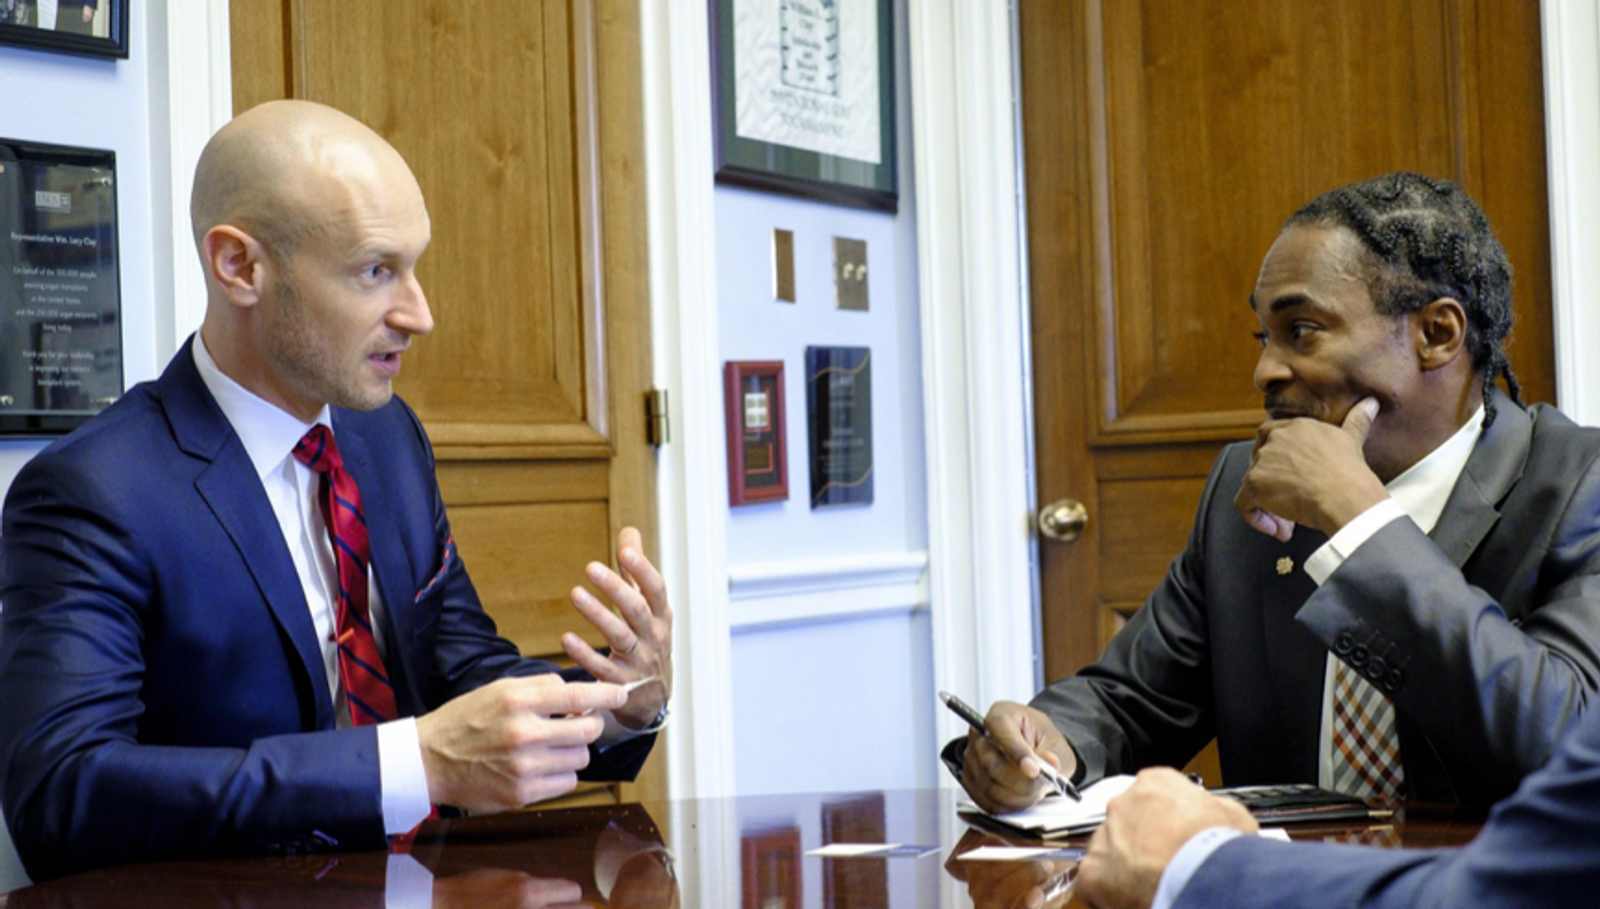 vestwell visits dc to talk 401k and tax reform with congress